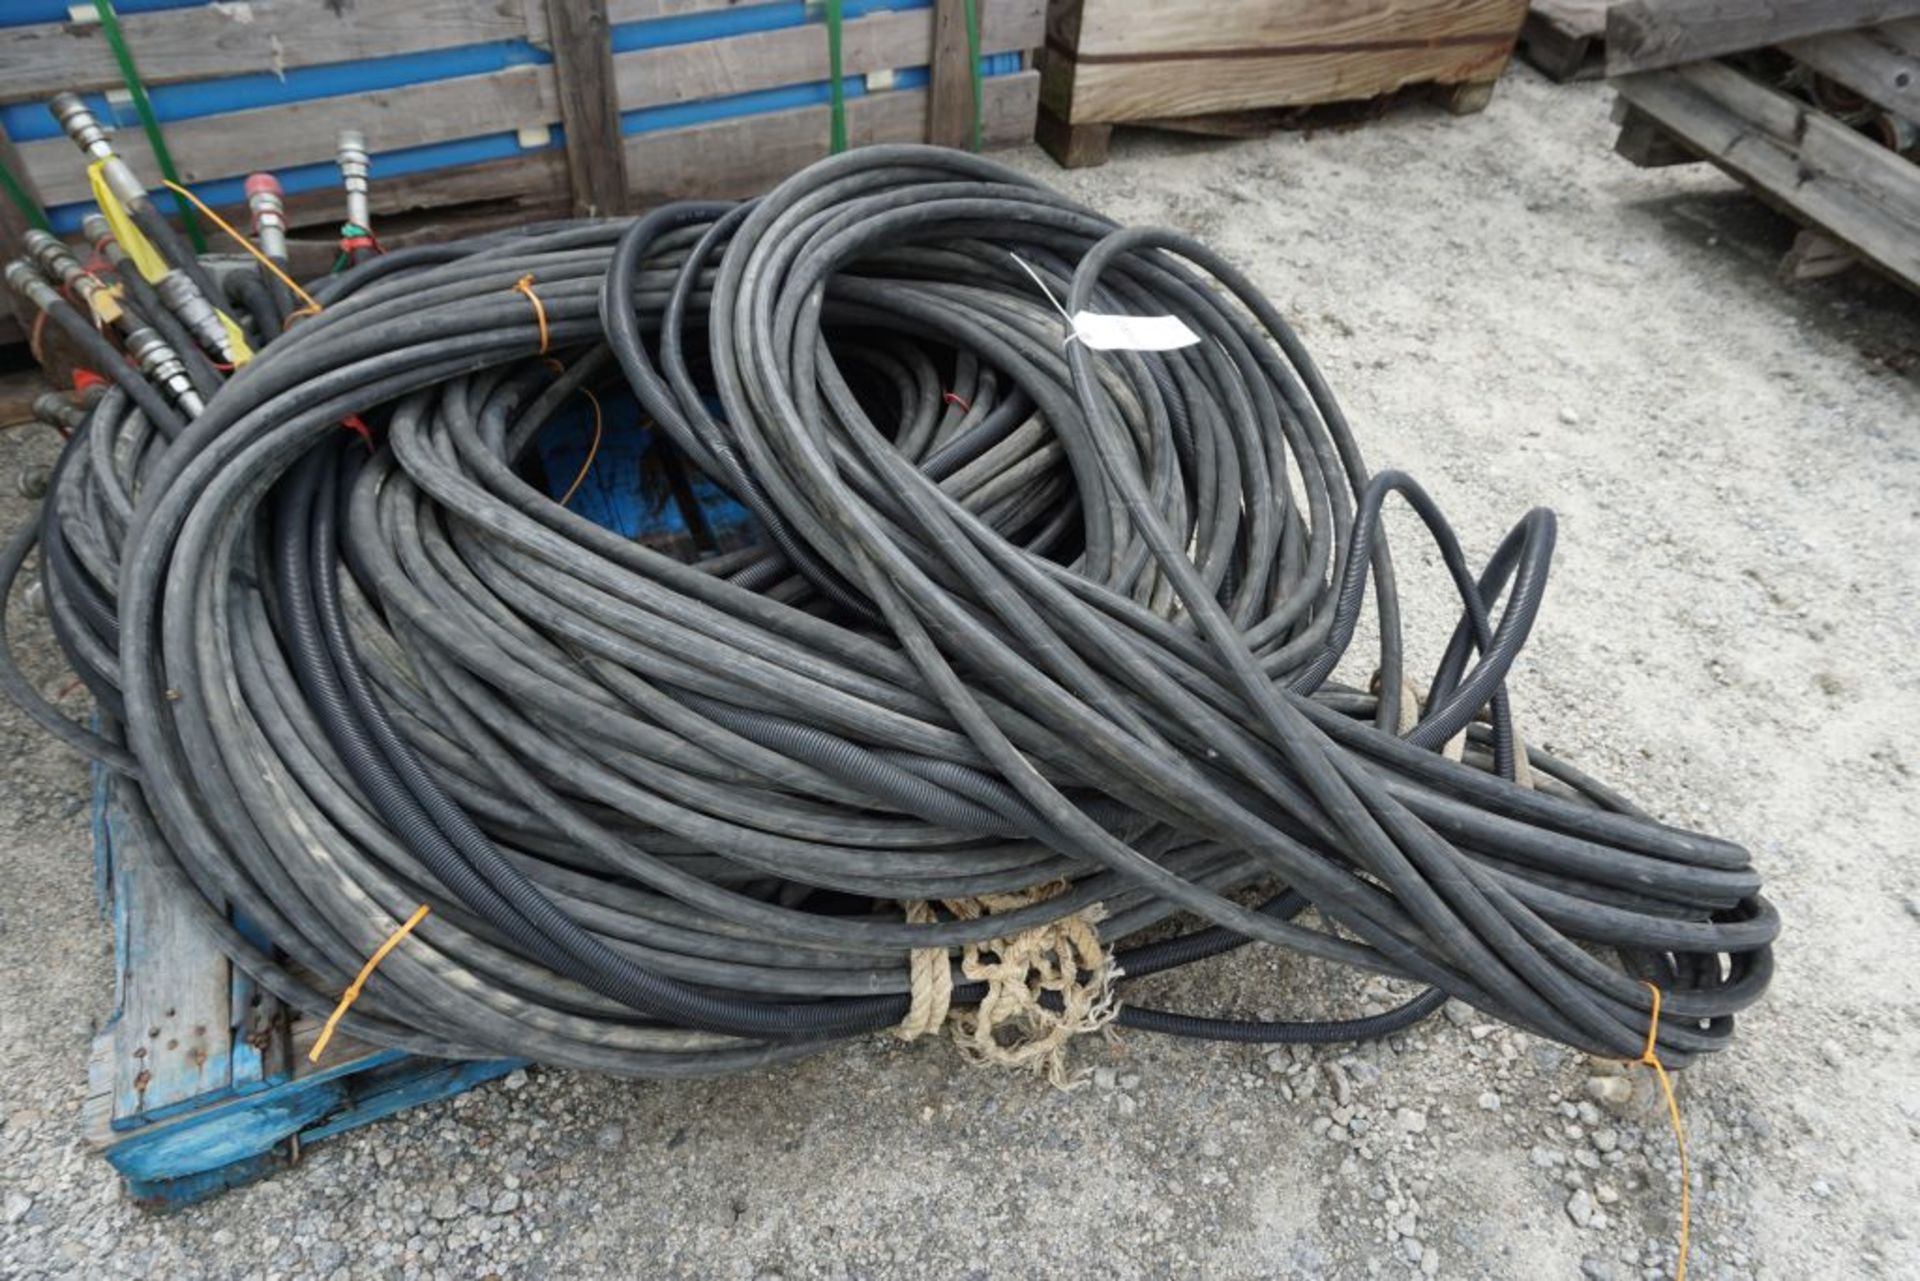 Lot of Hoses for Hydraulic Fluid for Booms, ETC - Tag: 220550 - Image 3 of 26